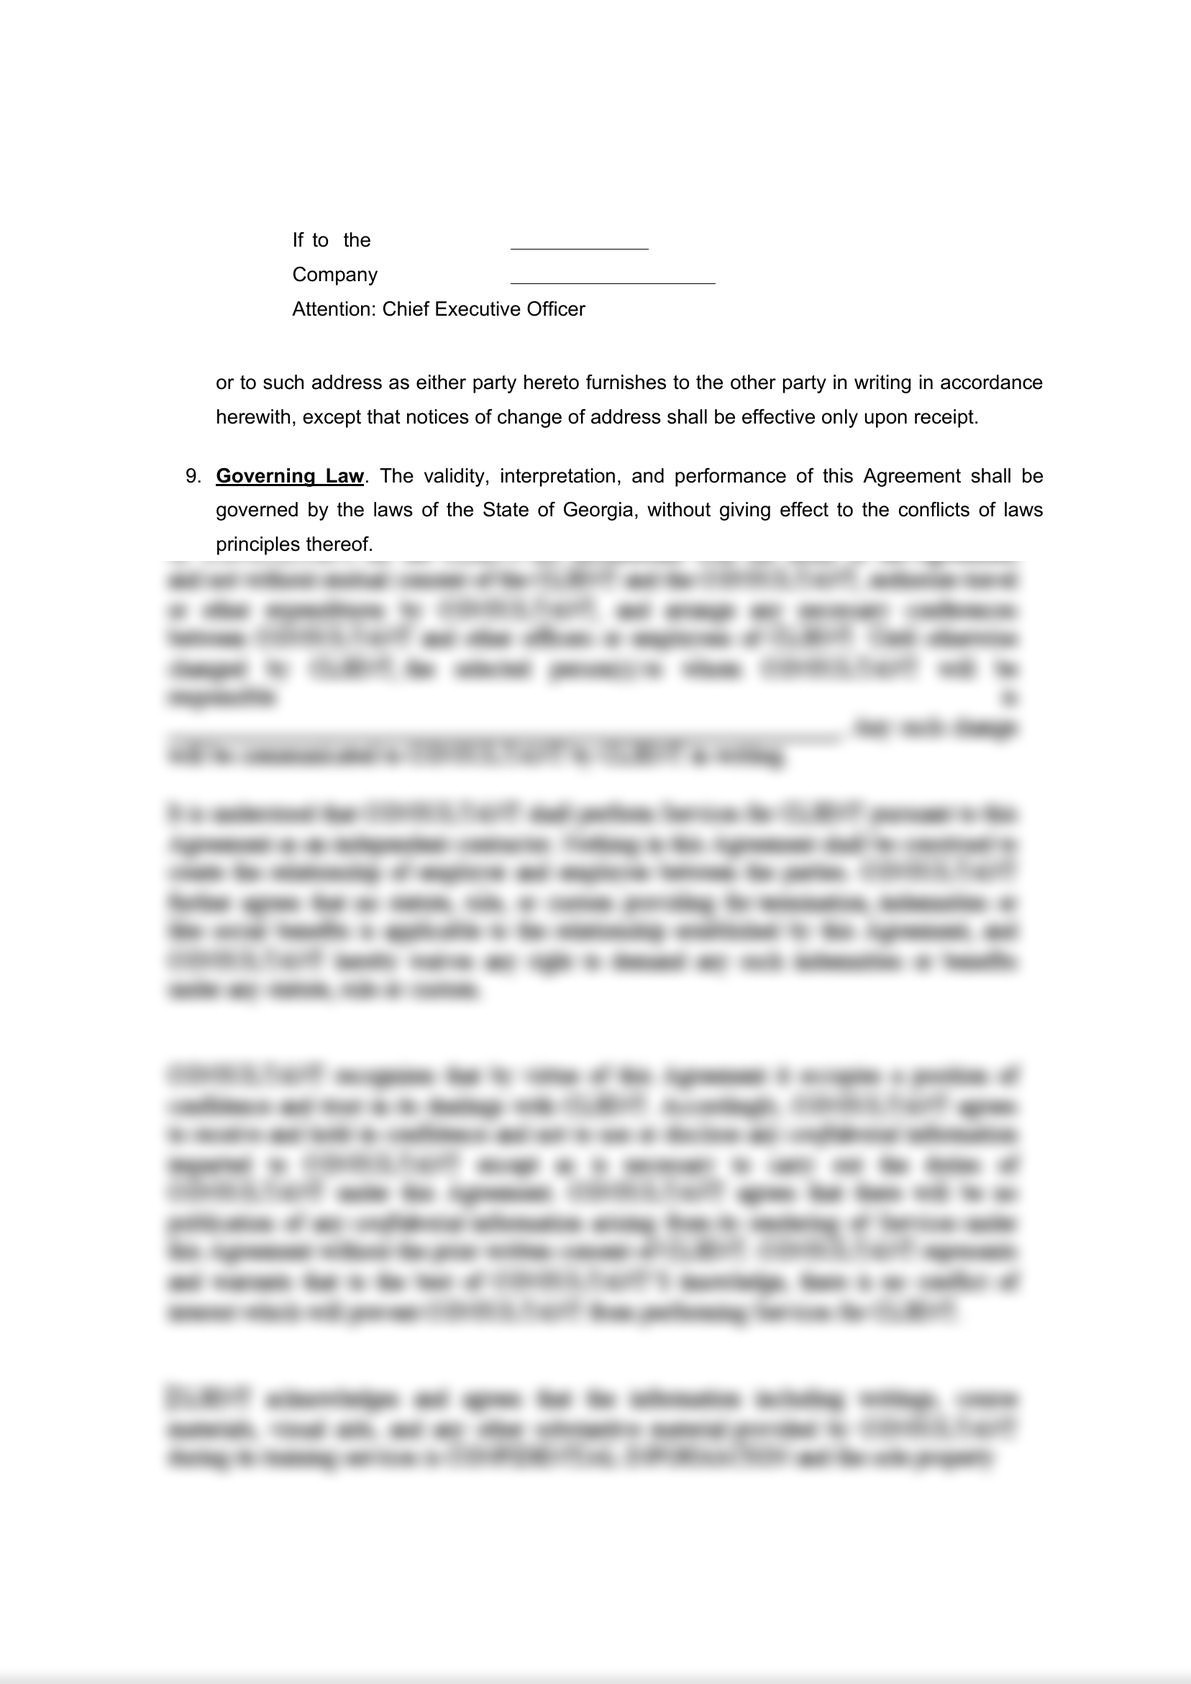 General Commission Agreement-7